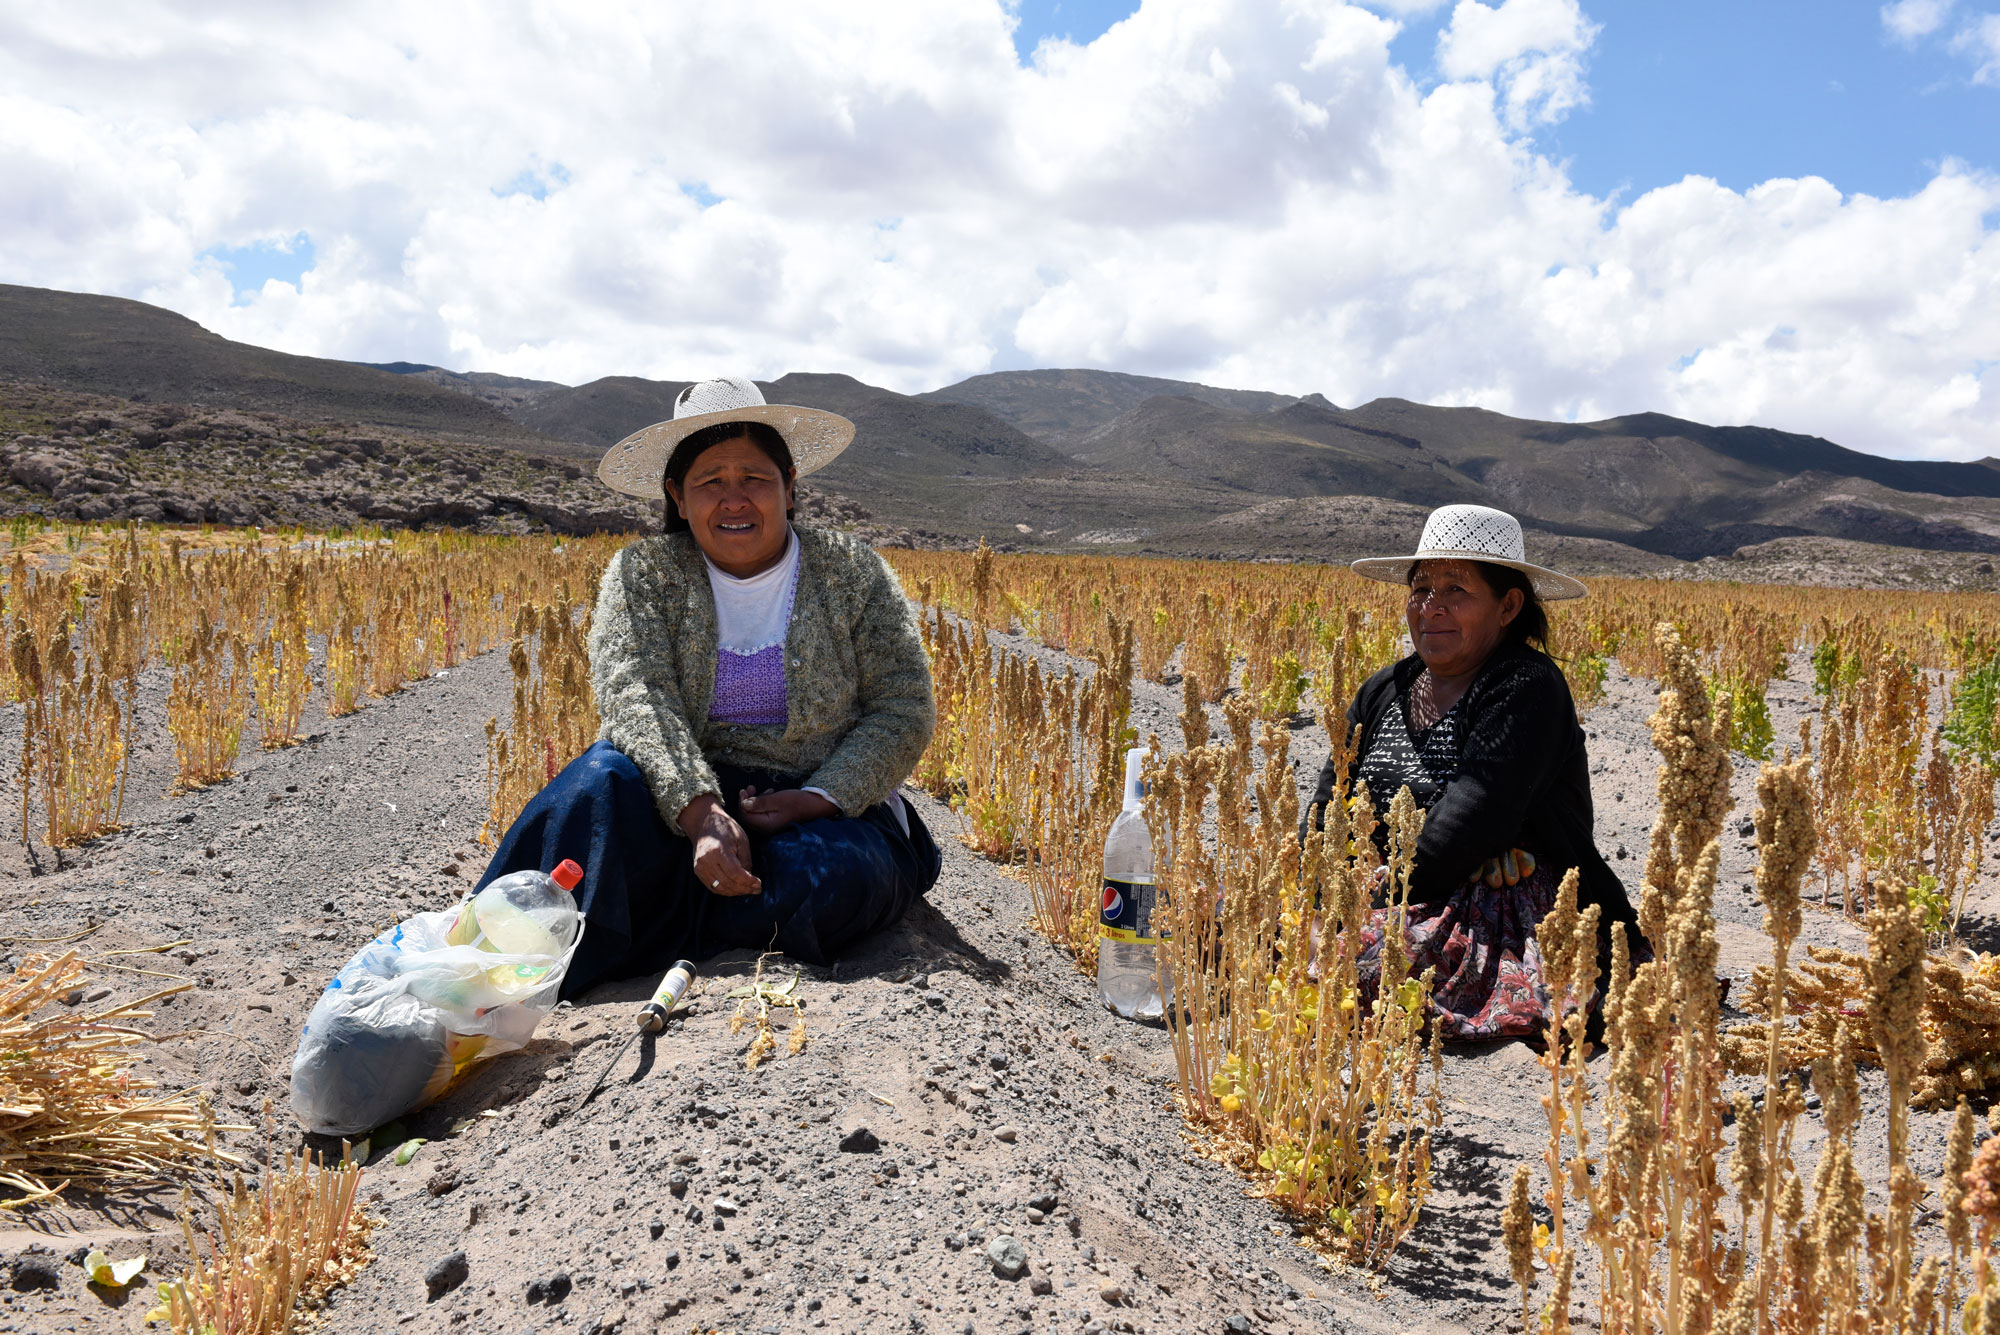 Two women in Bolivia sitting and tending a field